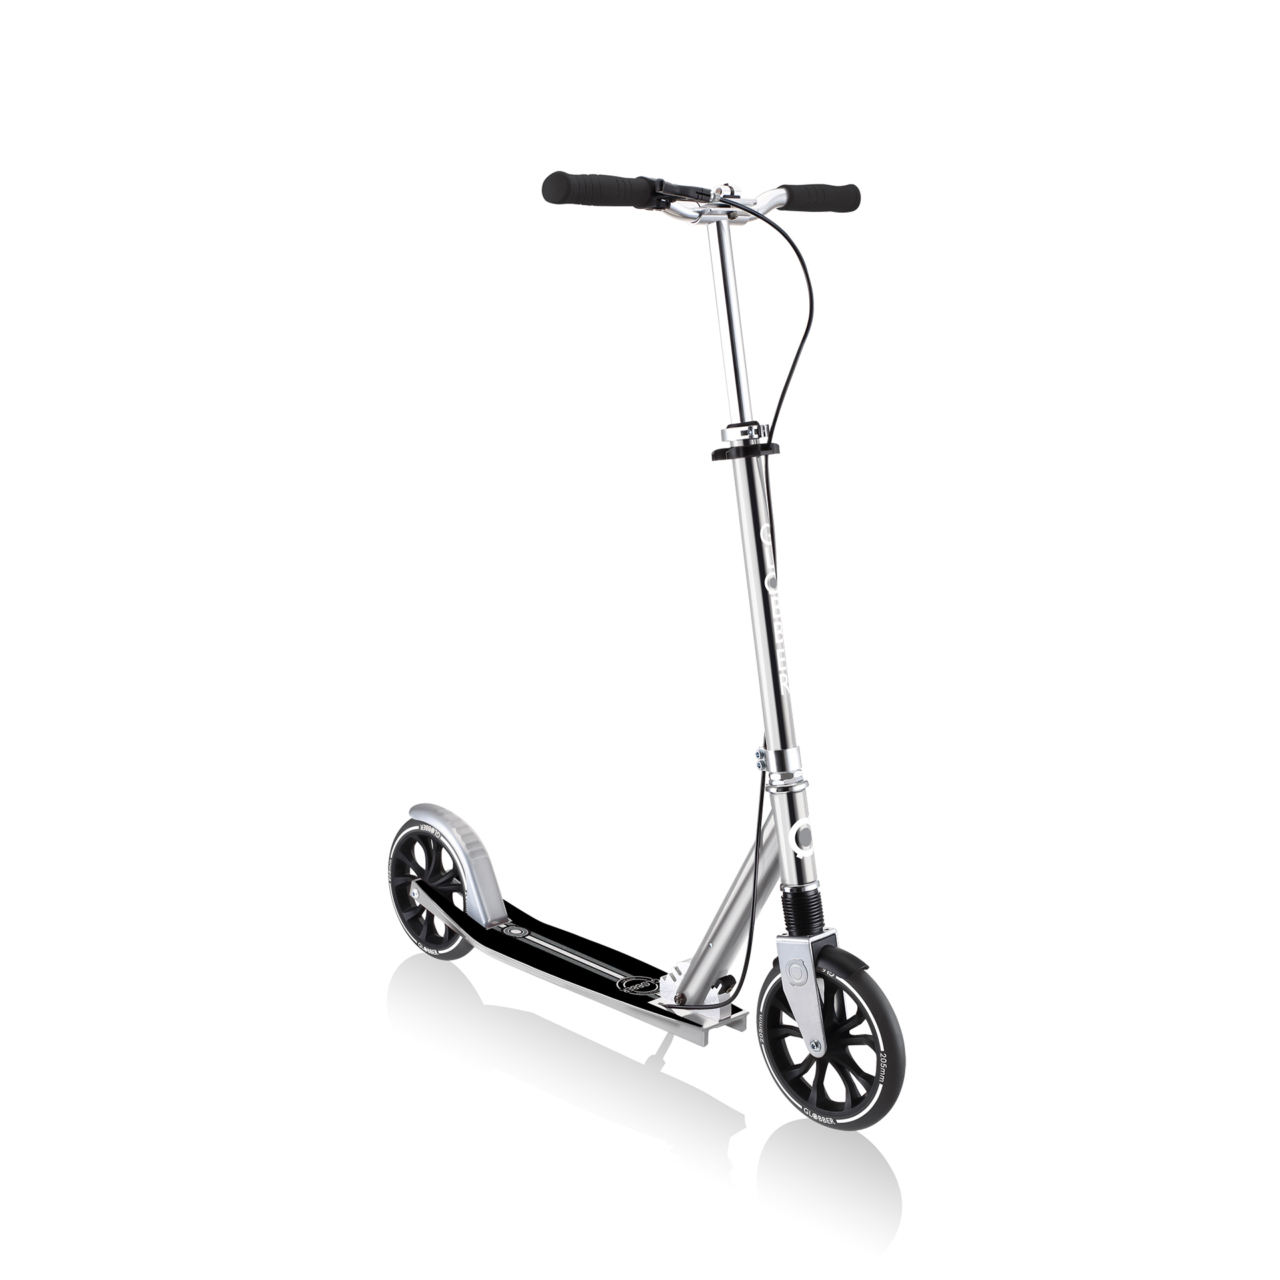 685 140 Big Wheel Scooter For Kids And Teens